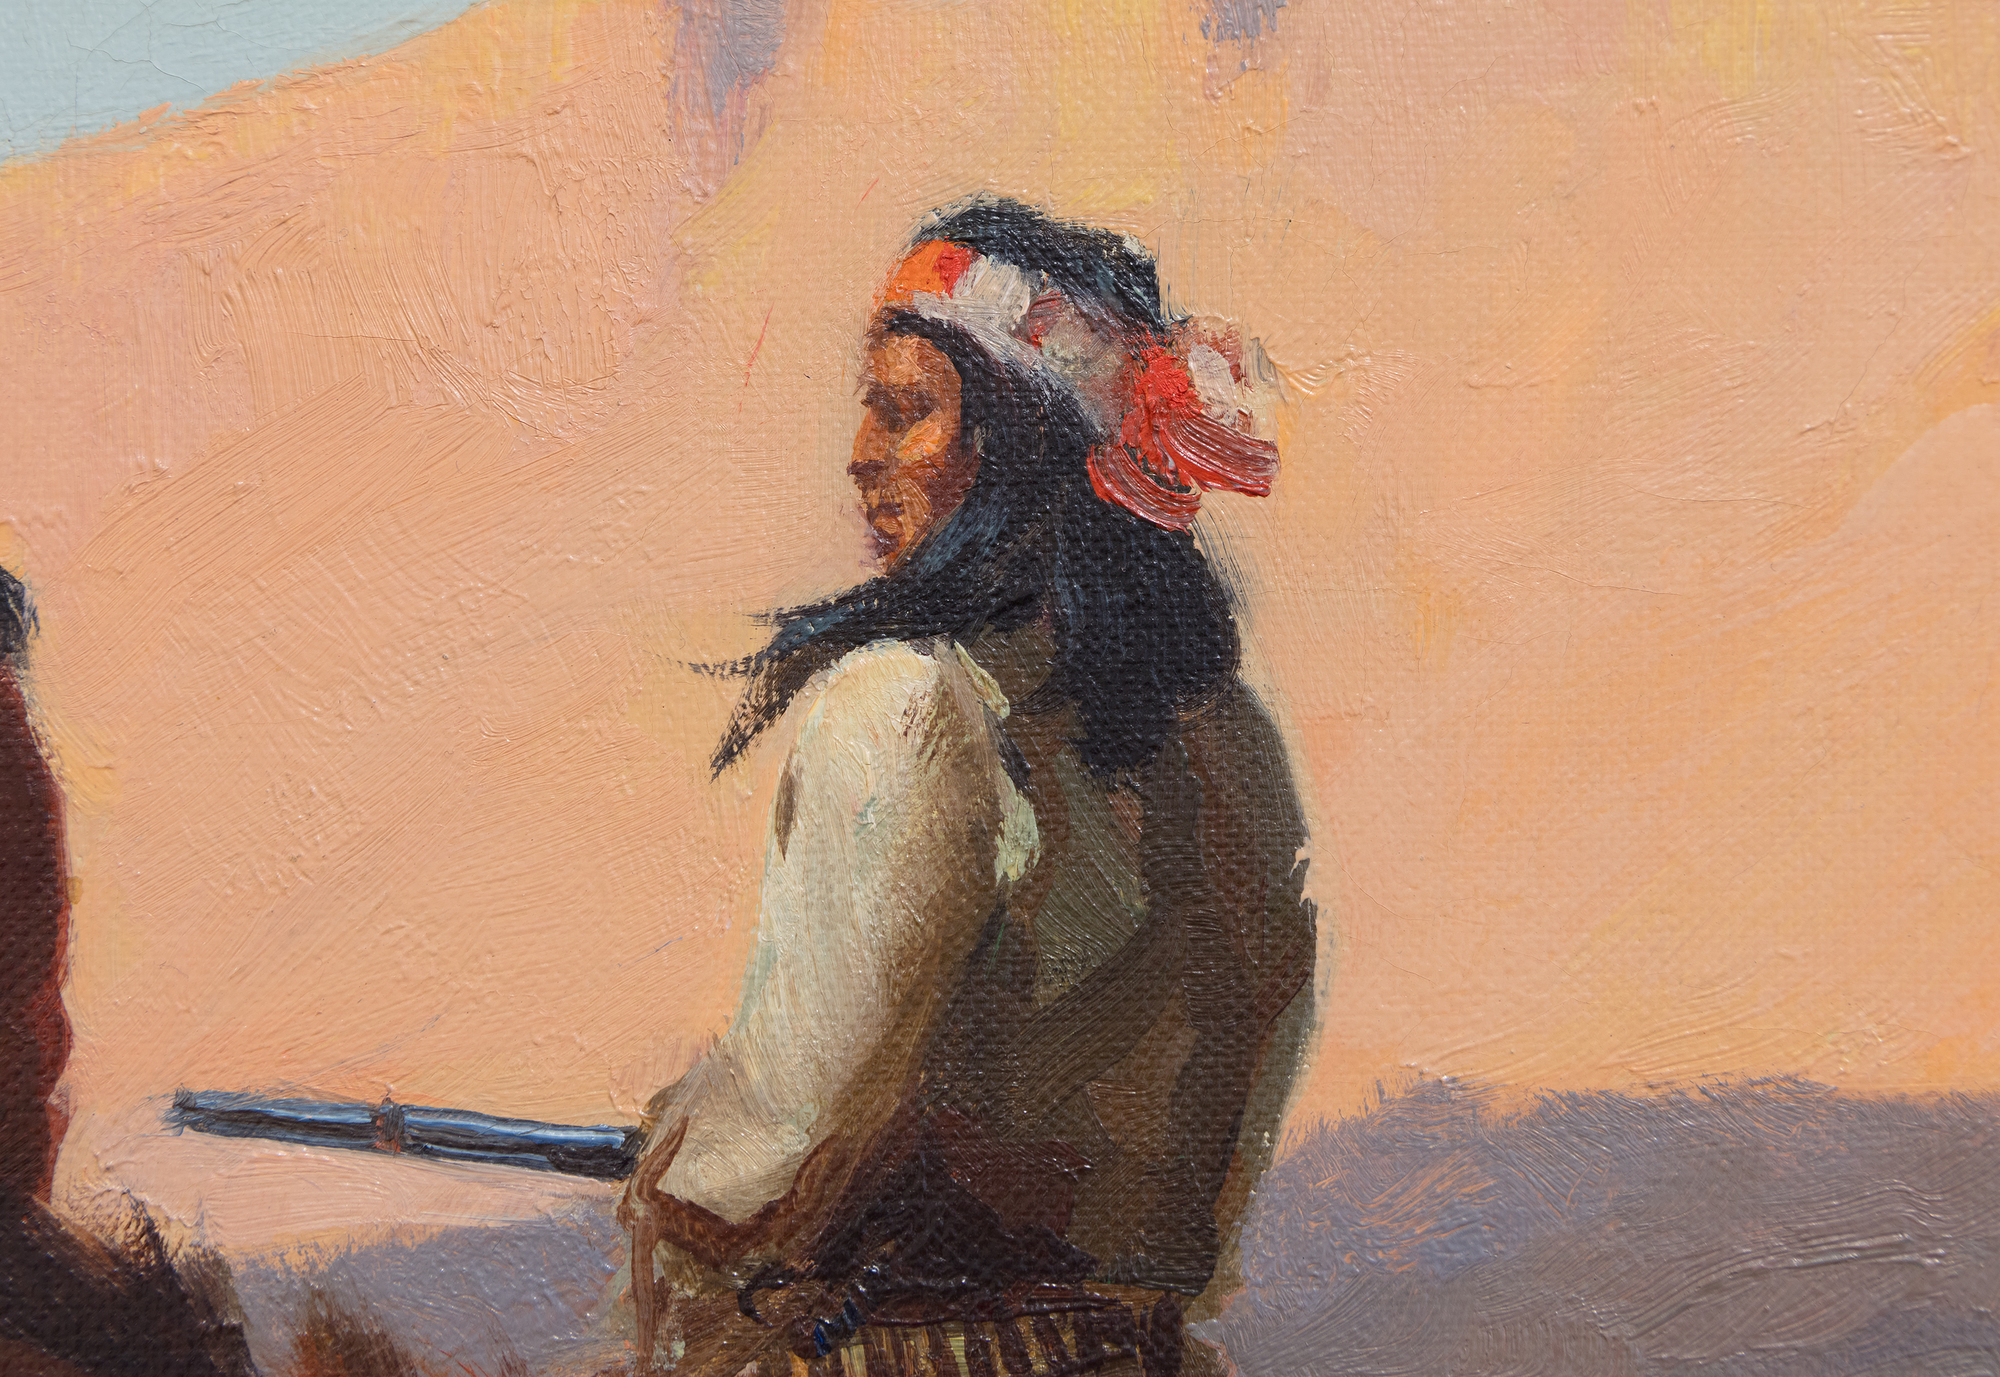 OLAF WIEGHORST - Apaches - huile sur toile - 20 x 24 in.